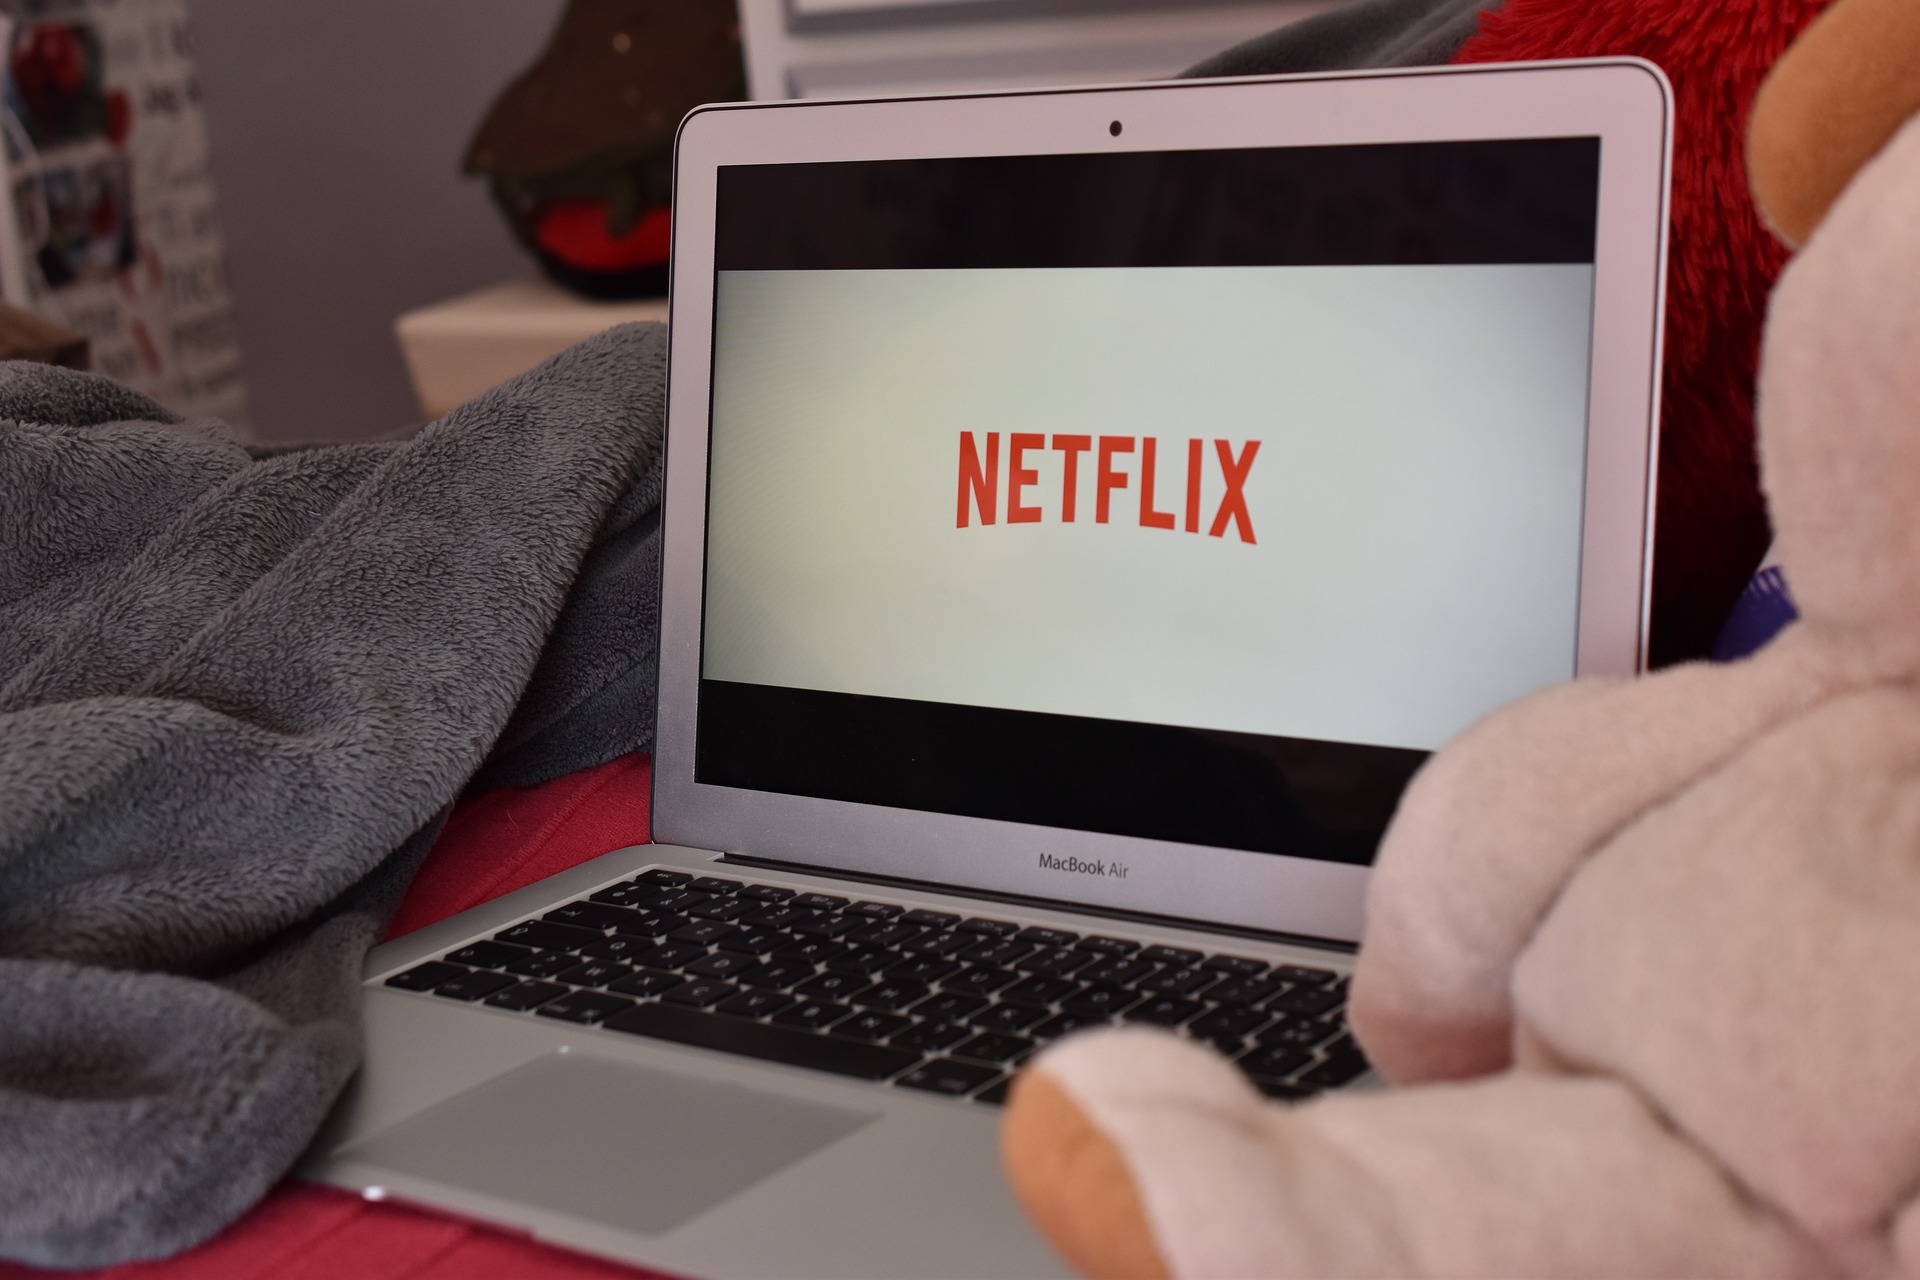 Read more about the article Netflix Remote Work Policy<span class="rmp-archive-results-widget rmp-archive-results-widget--not-rated"><i class=" rmp-icon rmp-icon--ratings rmp-icon--star "></i><i class=" rmp-icon rmp-icon--ratings rmp-icon--star "></i><i class=" rmp-icon rmp-icon--ratings rmp-icon--star "></i><i class=" rmp-icon rmp-icon--ratings rmp-icon--star "></i><i class=" rmp-icon rmp-icon--ratings rmp-icon--star "></i> <span>0 (0)</span></span>